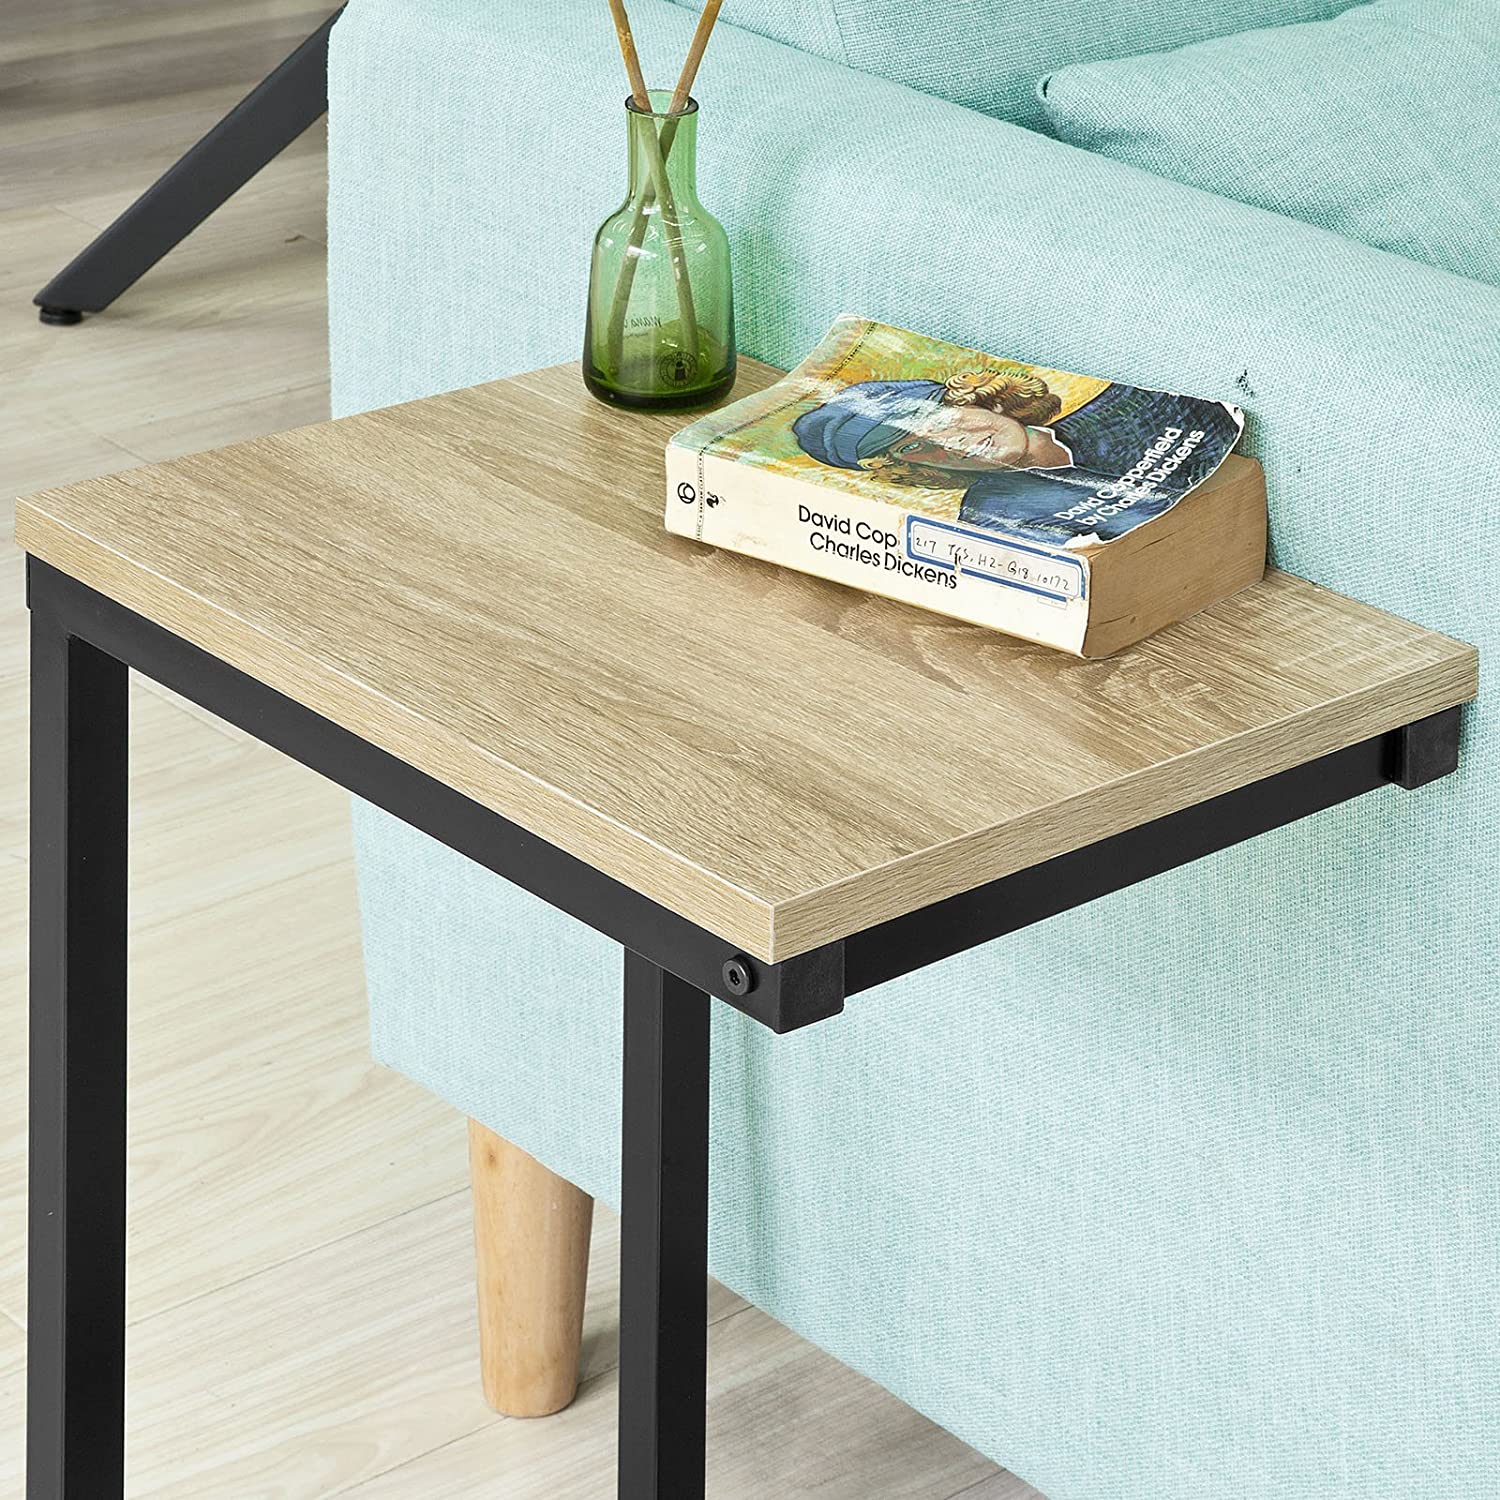 Sofa Side Table for Coffee time - image6